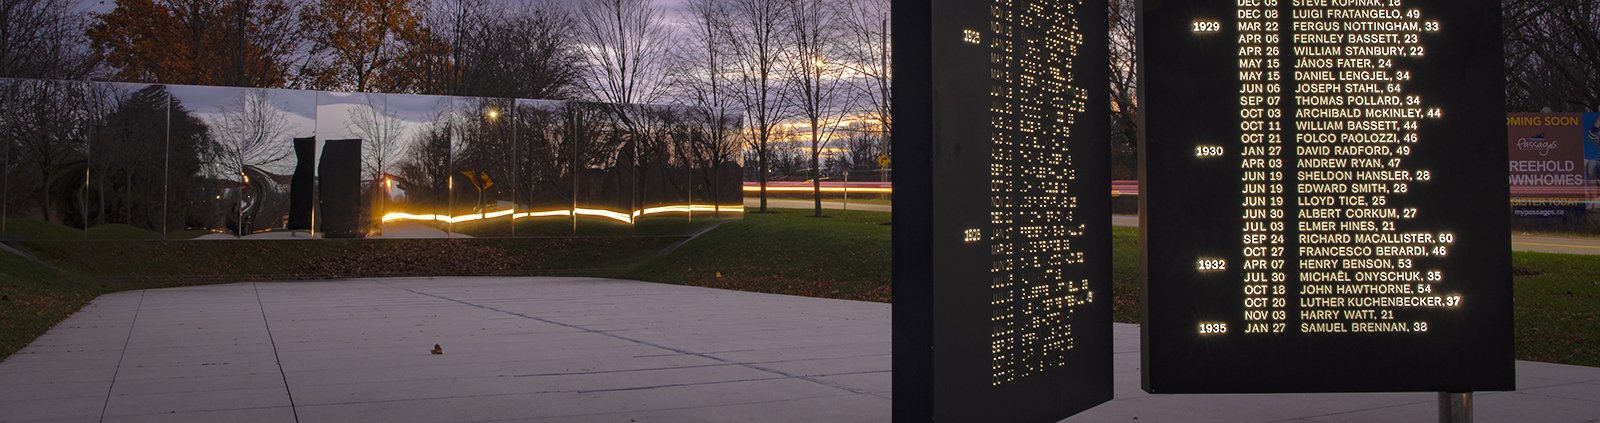 Names of fallen workers etched on a pillar with a mirrored wall behind them